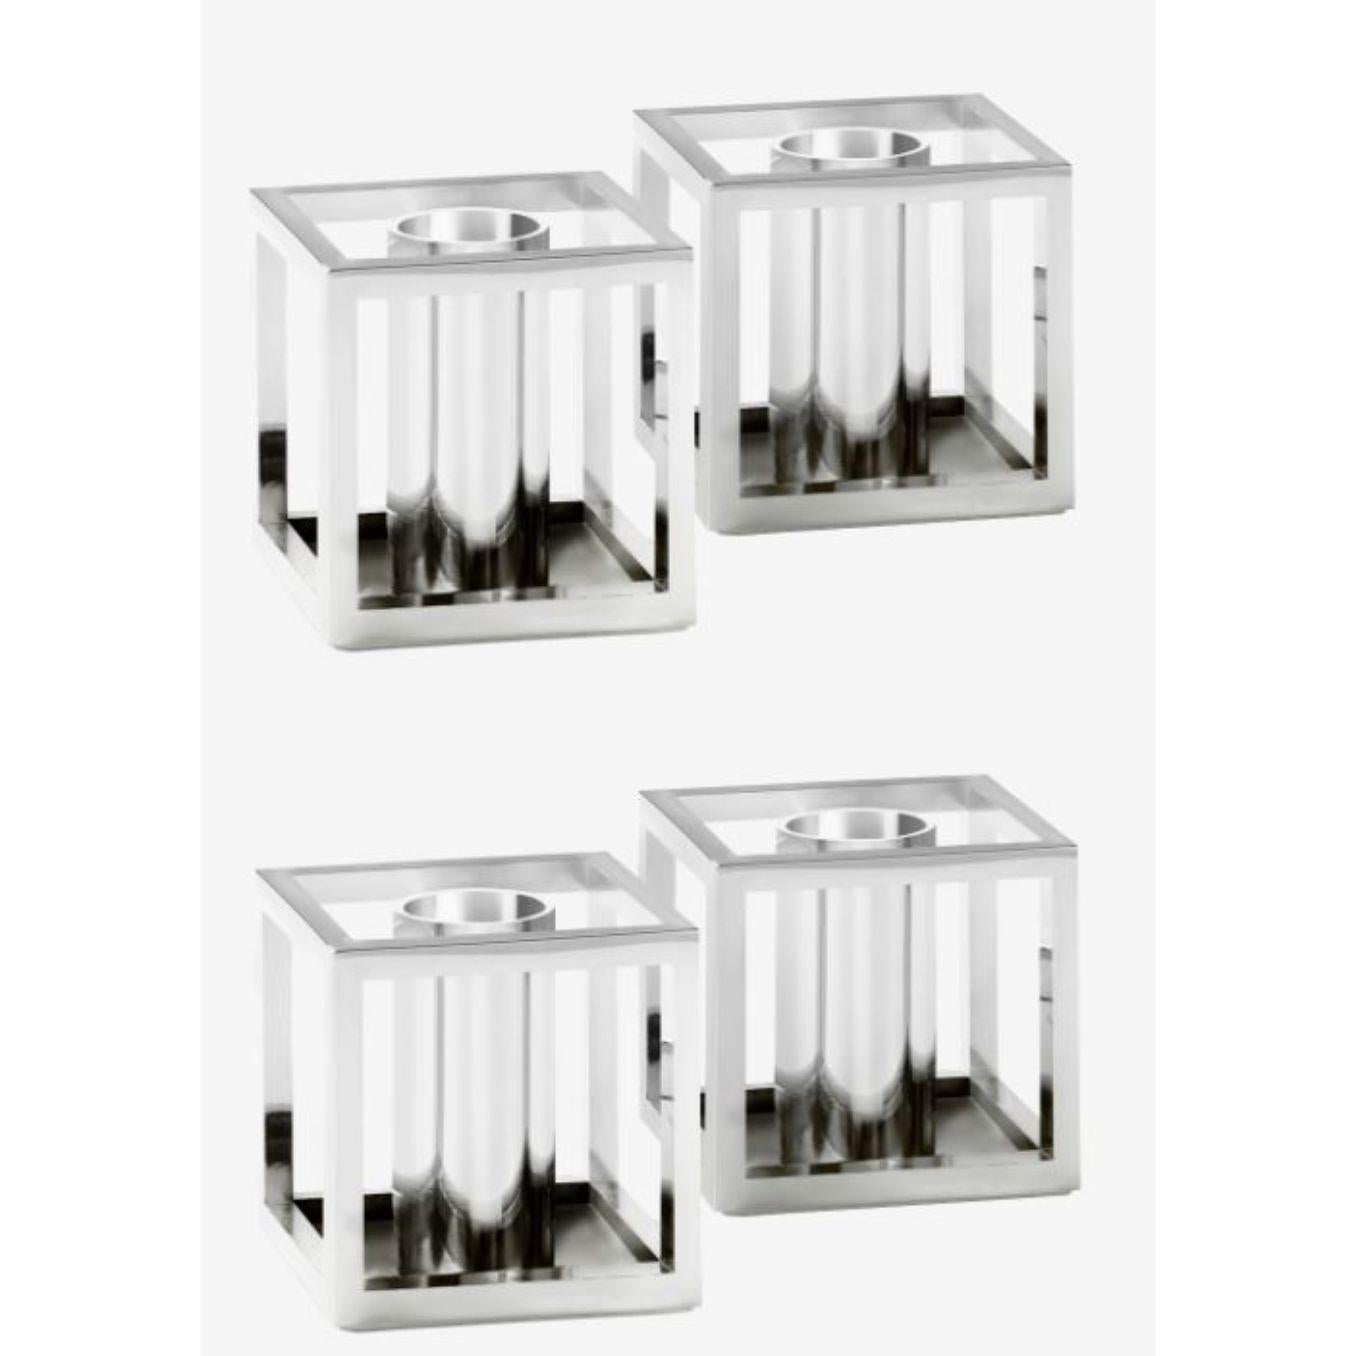 Set of 4 nickel plated Kubus micro candle holders by Lassen
Dimensions: D 3.50 x W 3.50 x H 3.65 cm 
Materials: Metal 
Also available in different dimensions.
Weight: 0.15 Kg

A new small wonder has seen the light of day. Kubus Micro is a